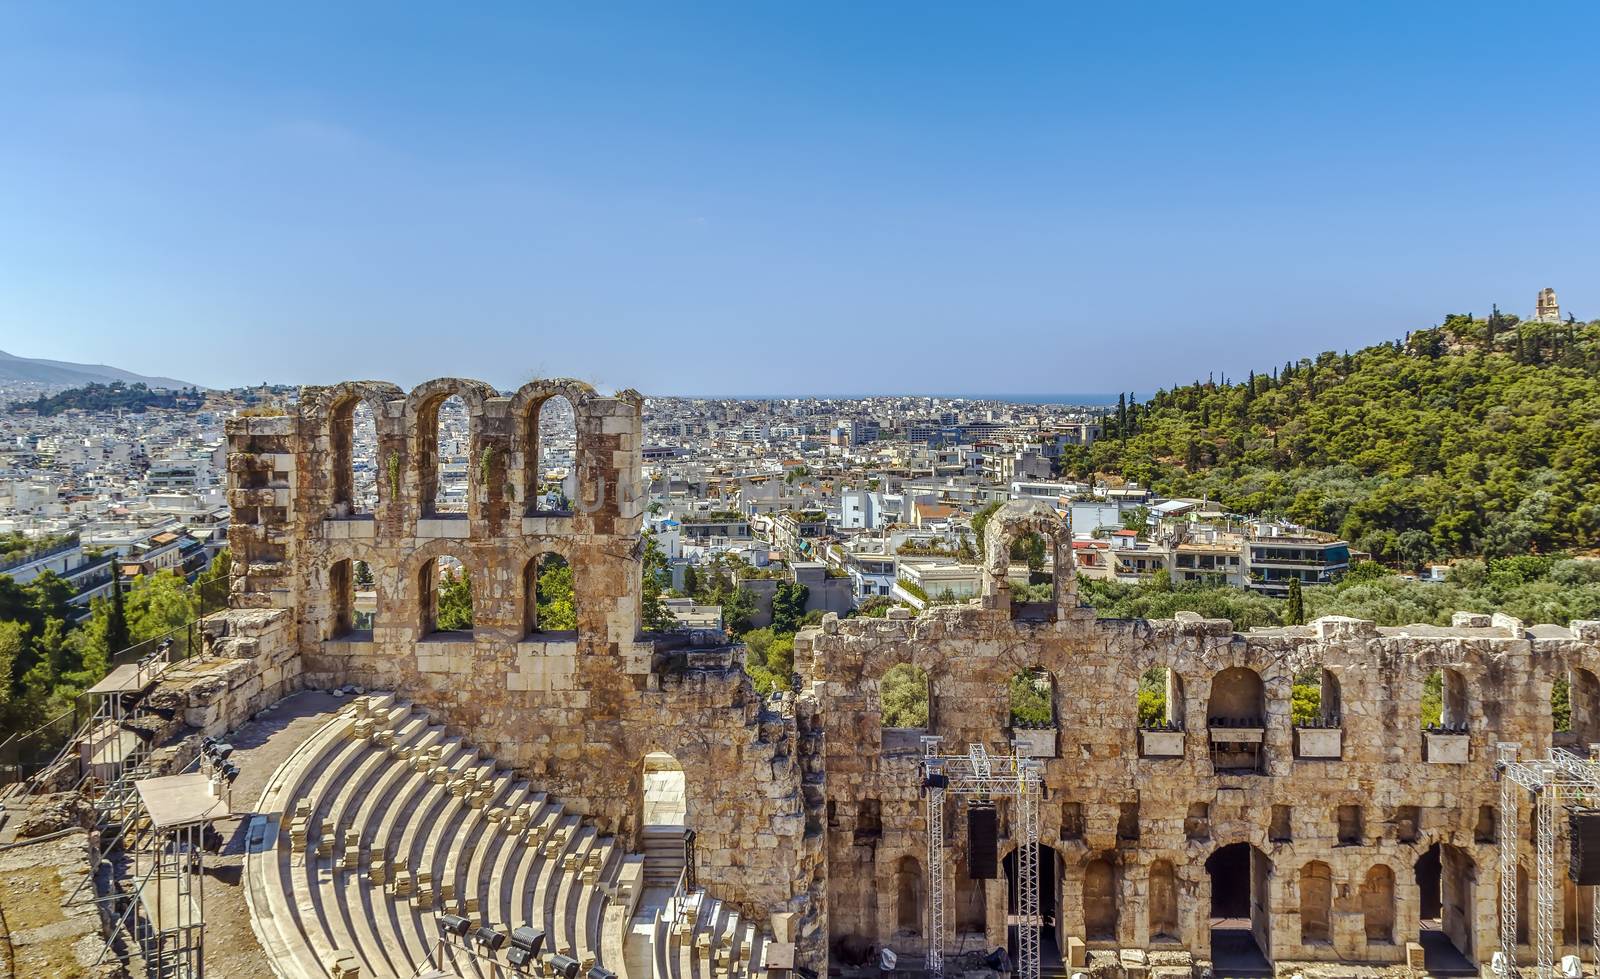 Odeon of Herodes Atticus, Athens by borisb17